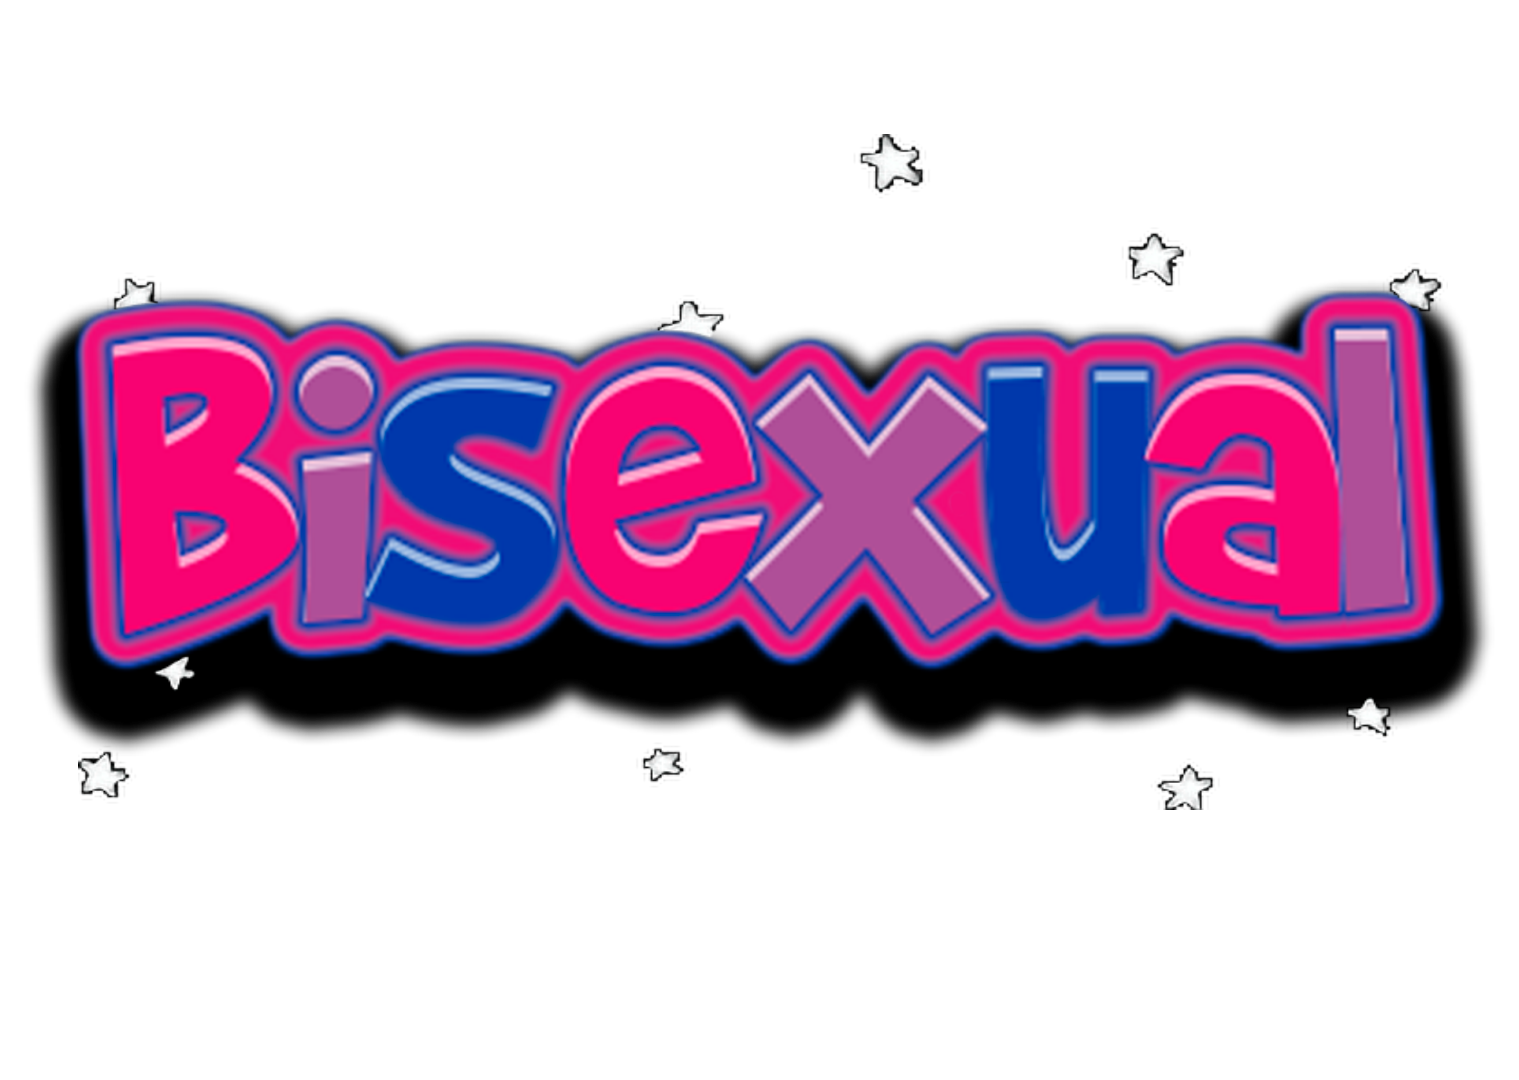 Bisexual Bisexualandproud Bisexuality Sticker By Julesclai